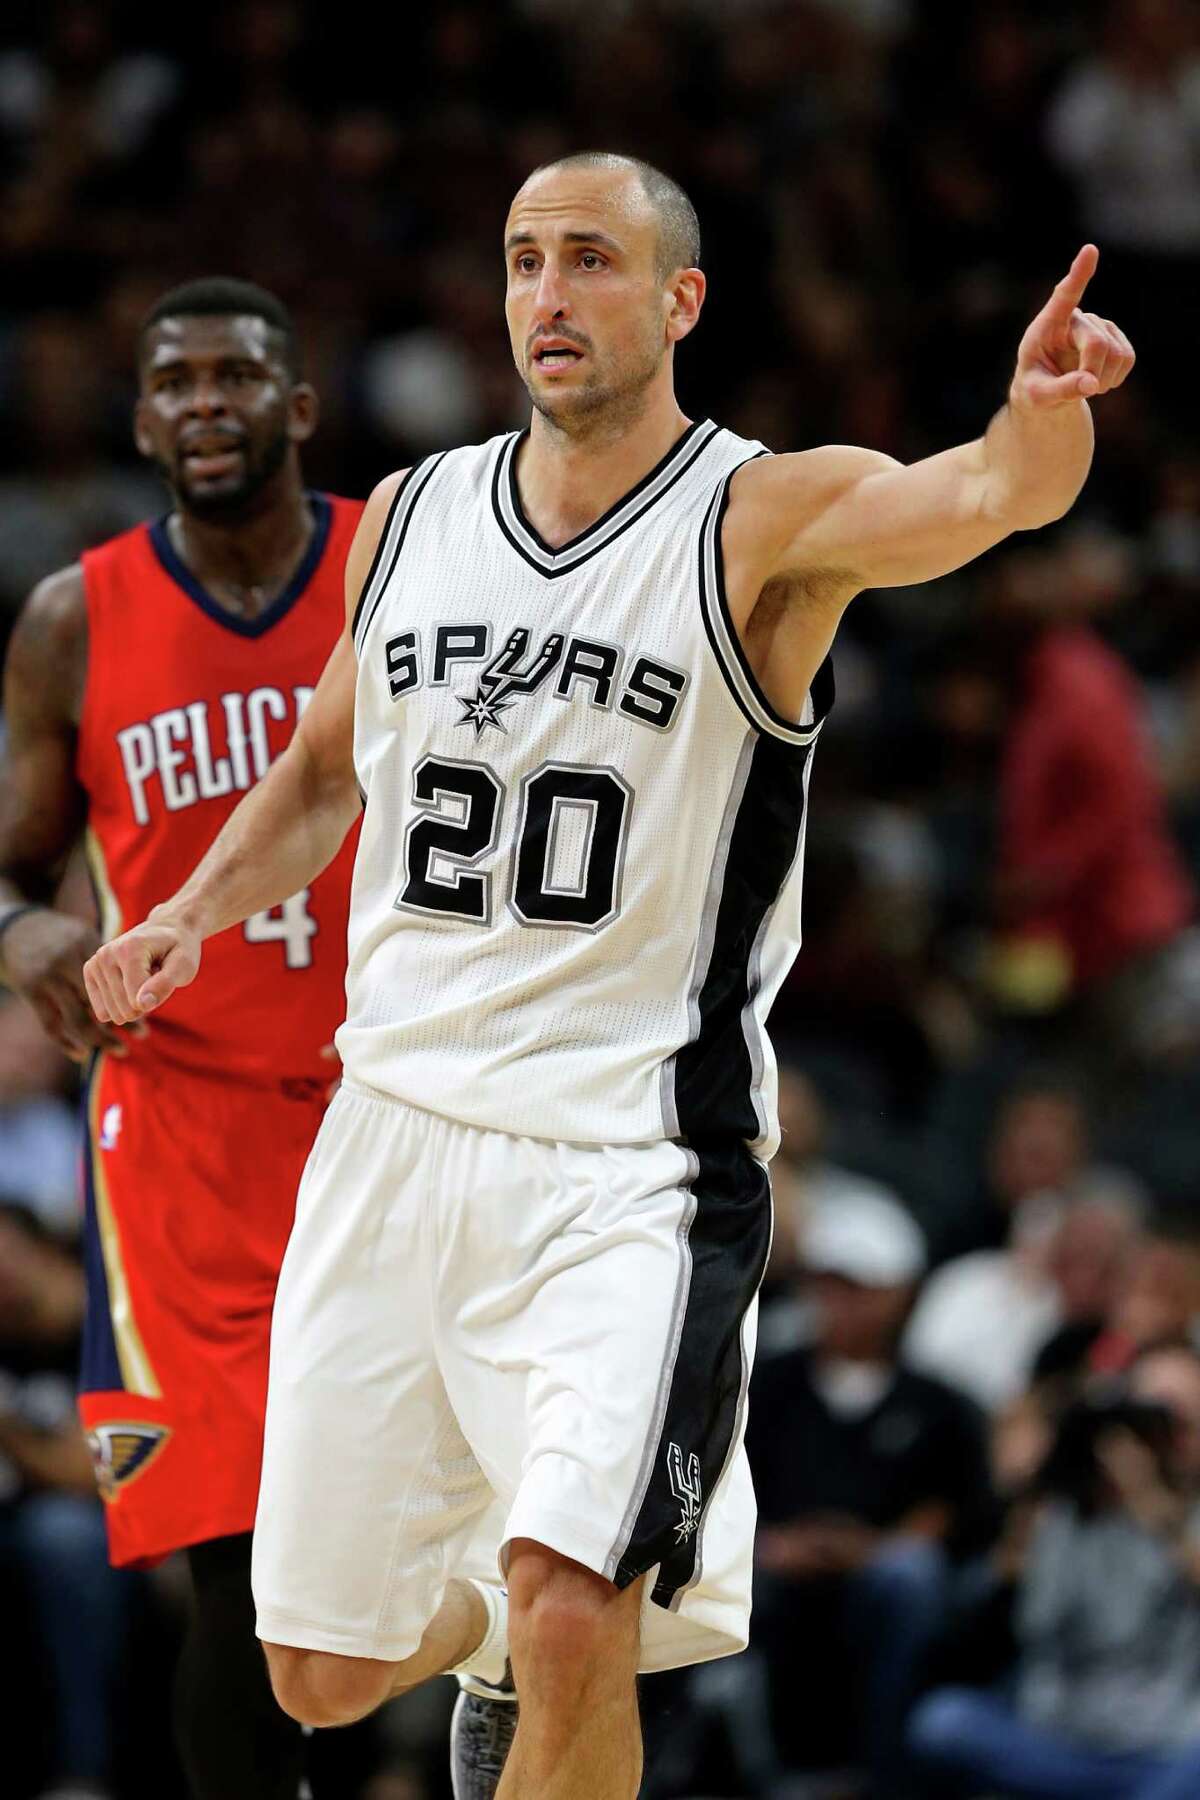 San Antonio Spurs' Manu Ginobili scrambles to defend during the second half against the New Orleans Pelicans at the AT&T Center, Wednesday, March 30, 2016. The Spurs won, 100-92.